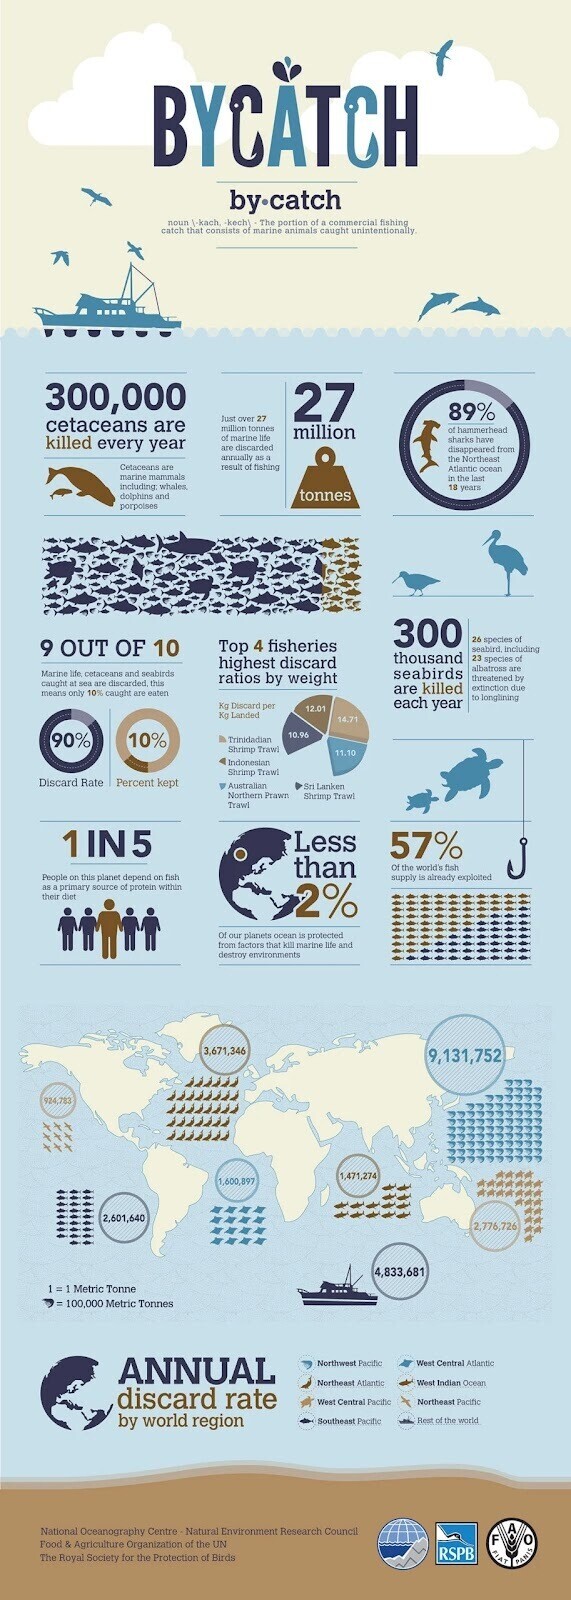 Ensia's infographic showing data on bycatch